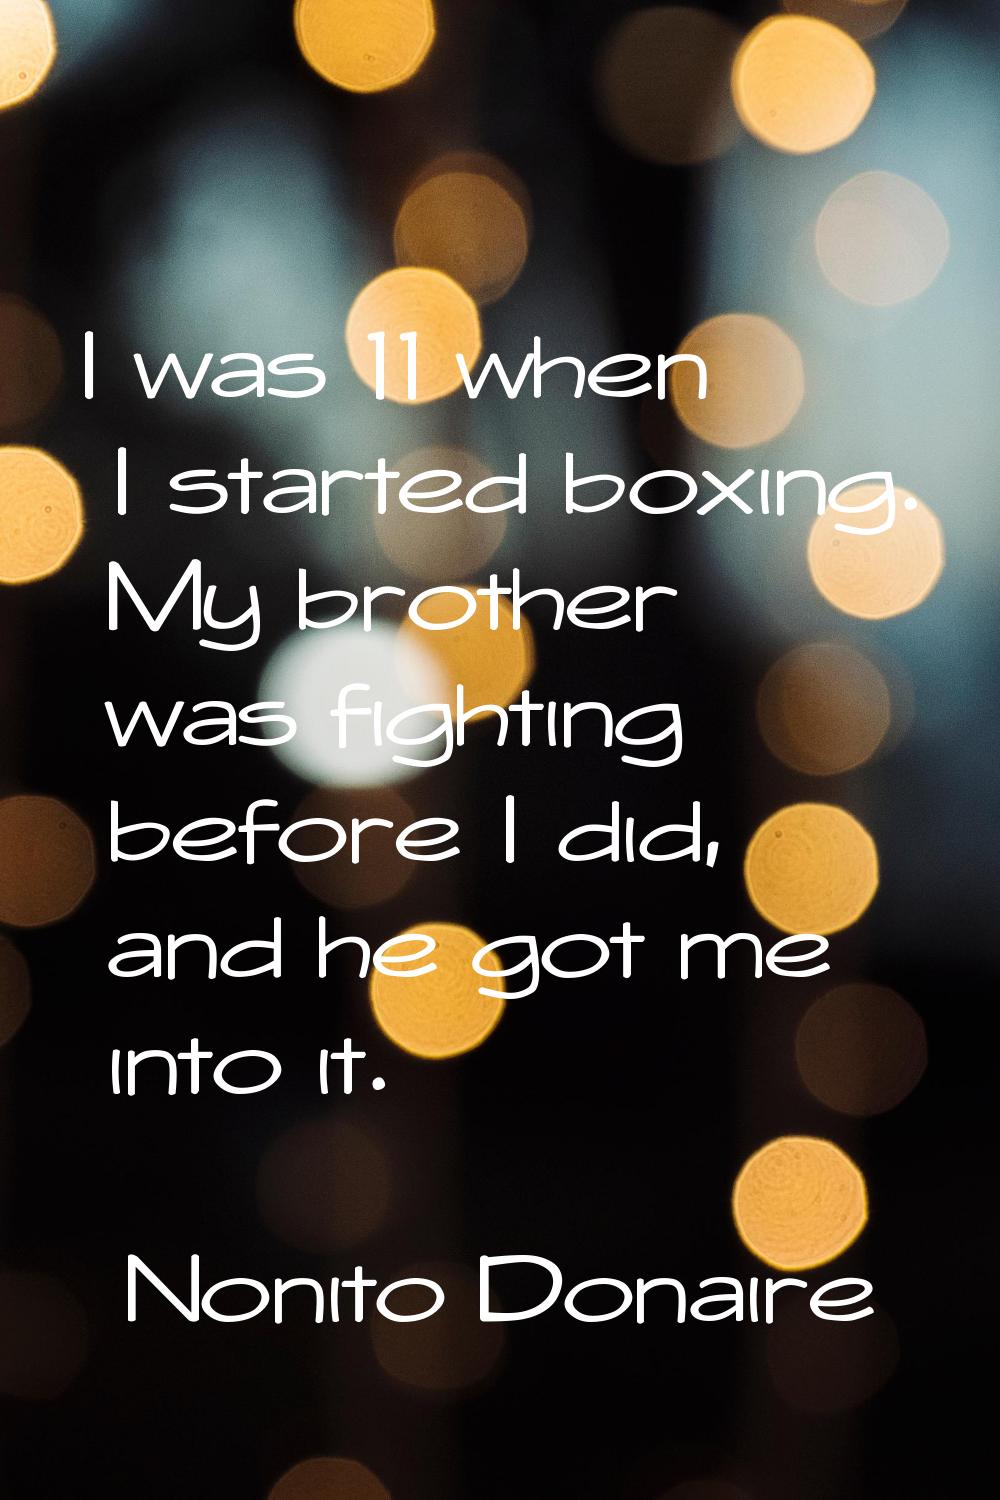 I was 11 when I started boxing. My brother was fighting before I did, and he got me into it.